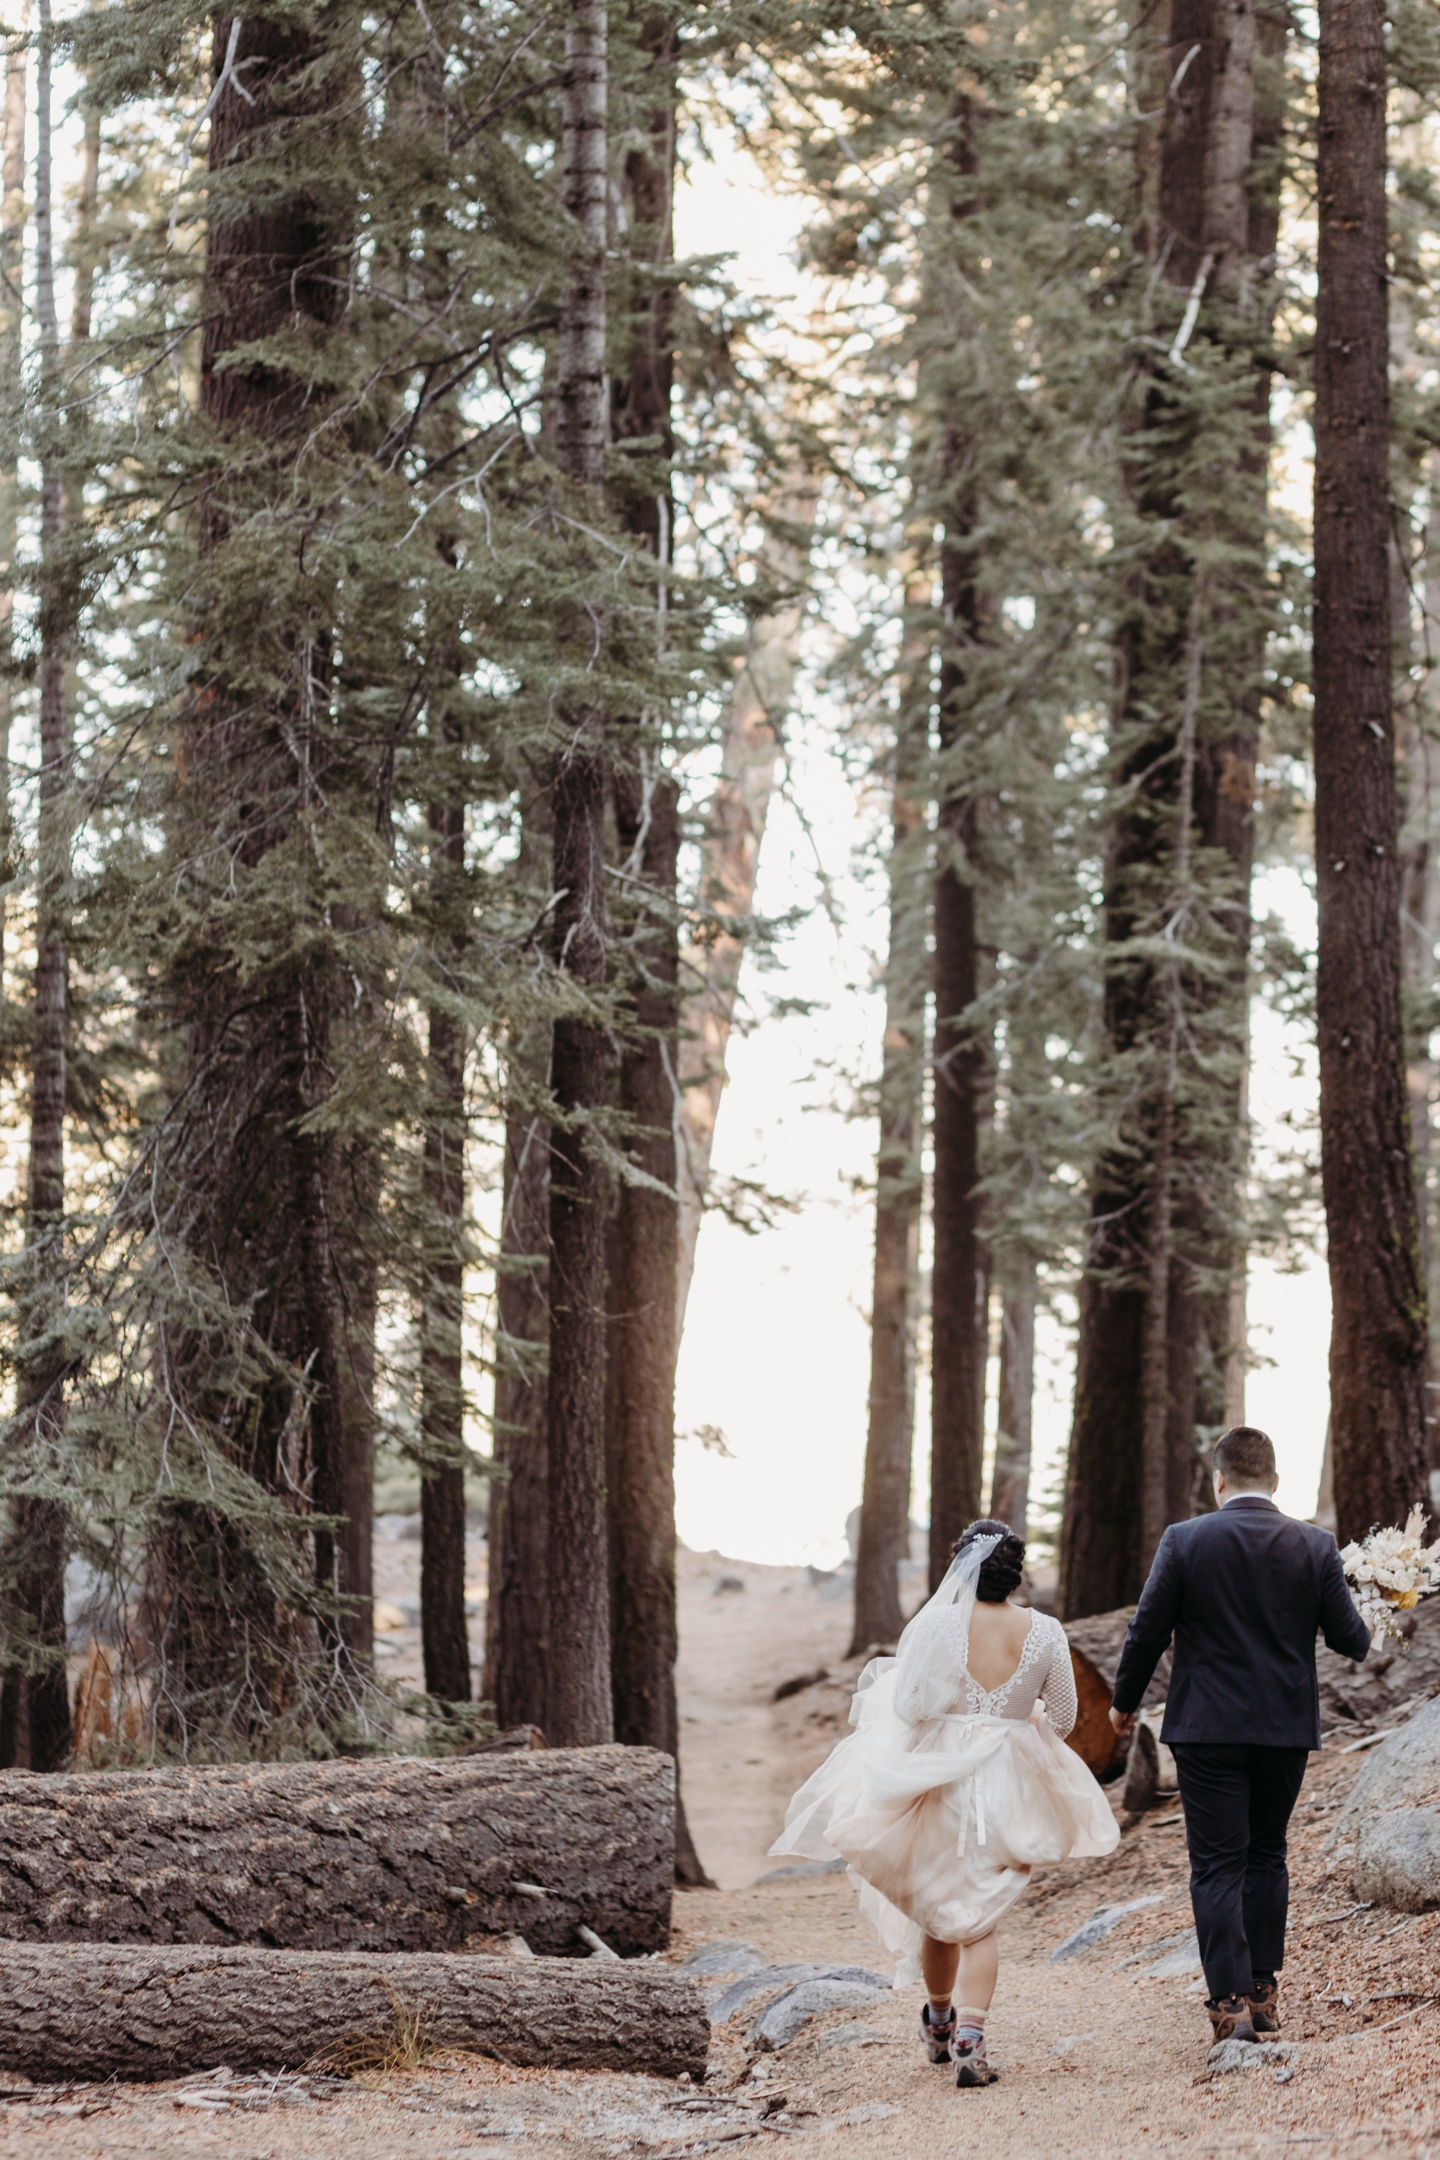 Bride and groom hike down a Yosemite hiking trail in between tall pines in their wedding attire